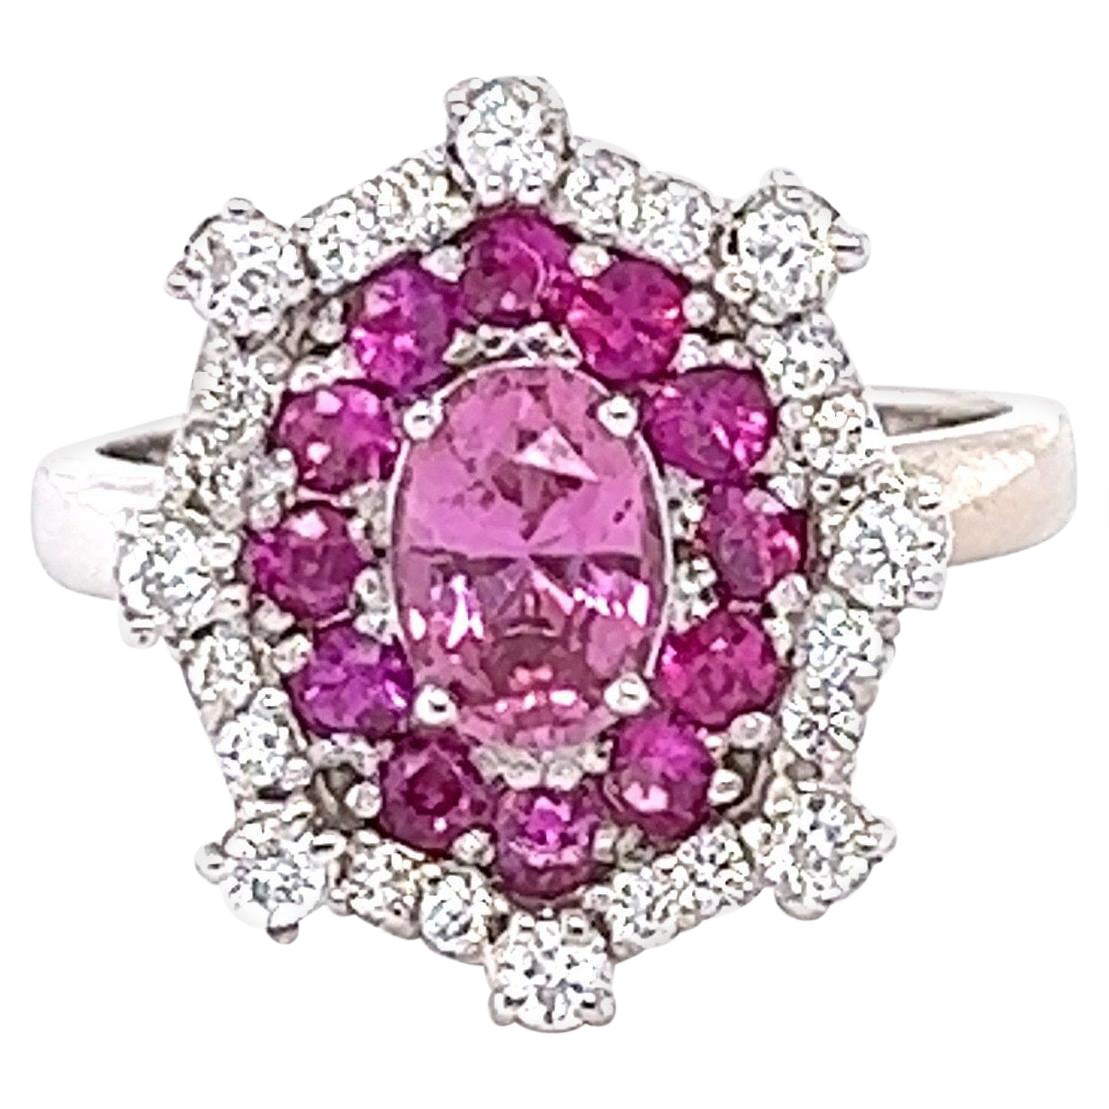 2.01 Carat Pink Sapphire Diamond White Gold Cocktail Ring For Sale